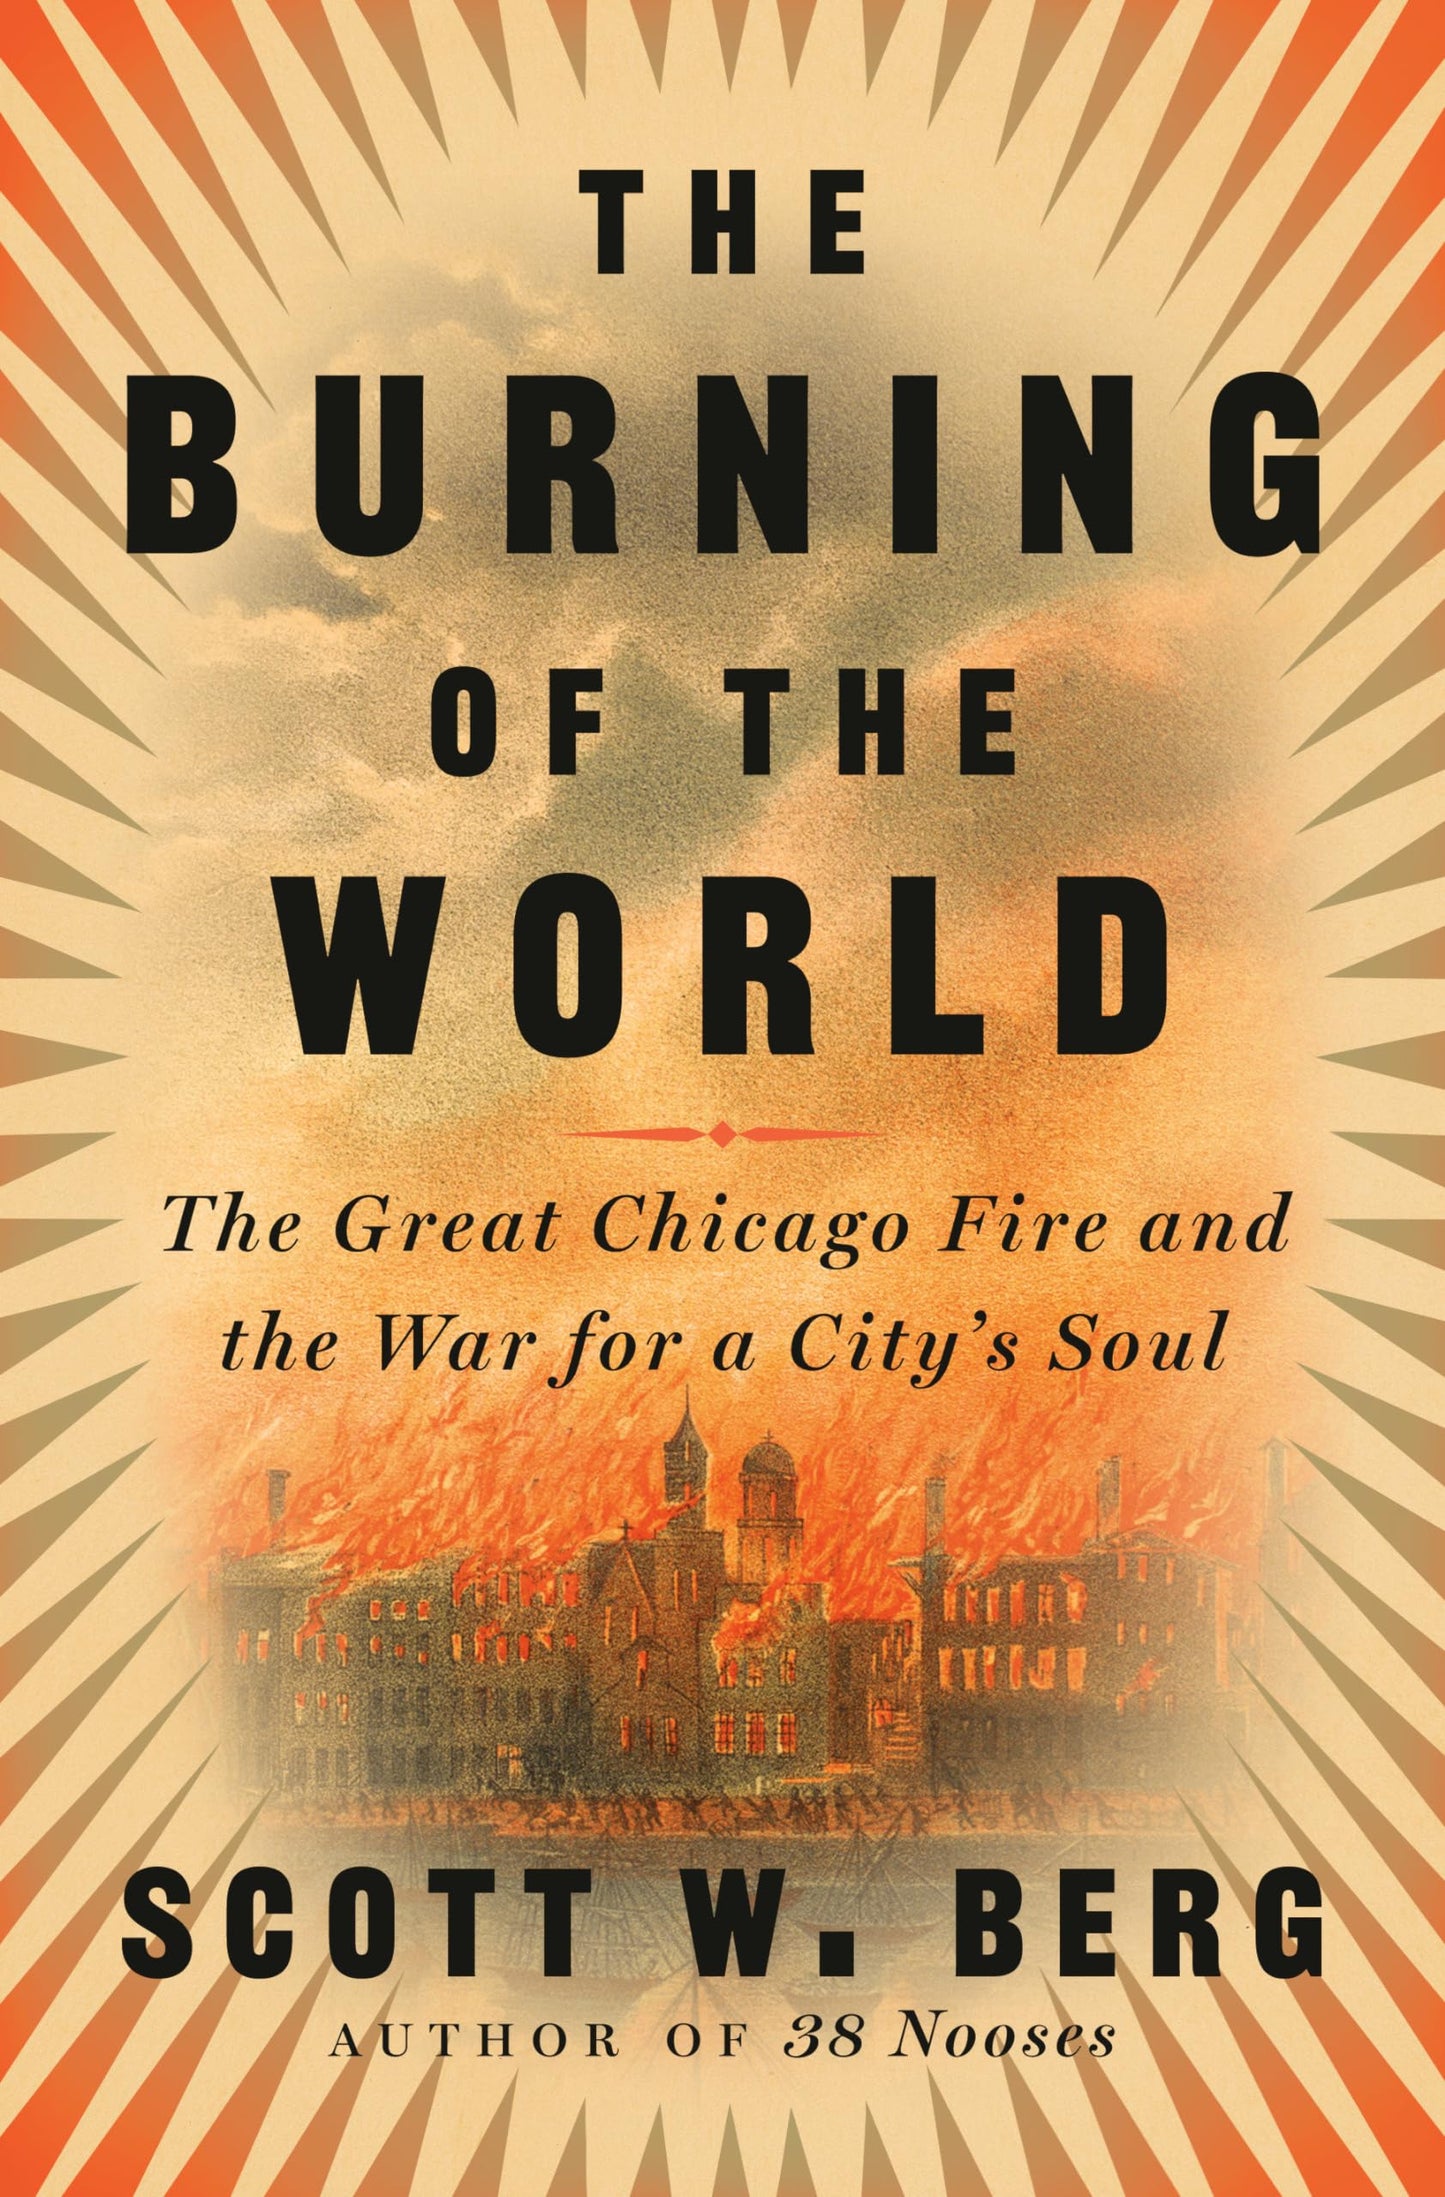 Burning of the World: The Great Chicago Fire and the War for a City's Soul